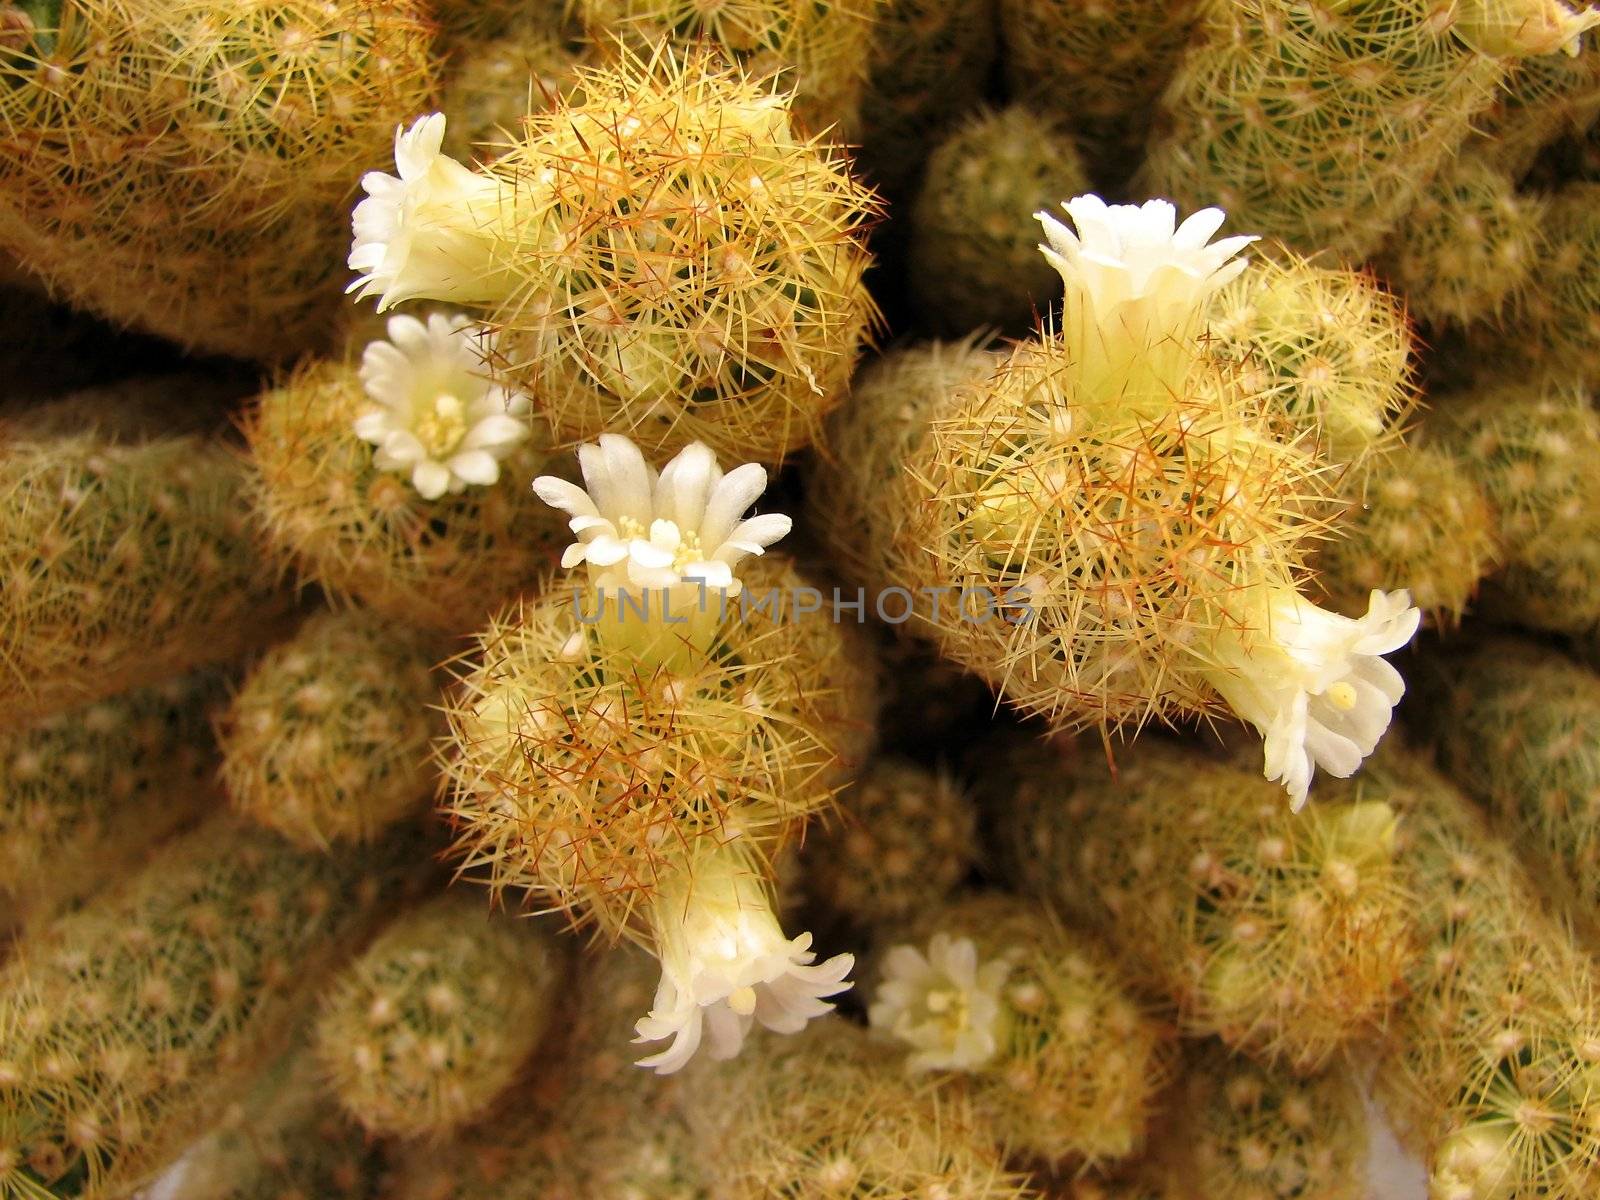 Prickly beauty - closeup of a blooming cactus.